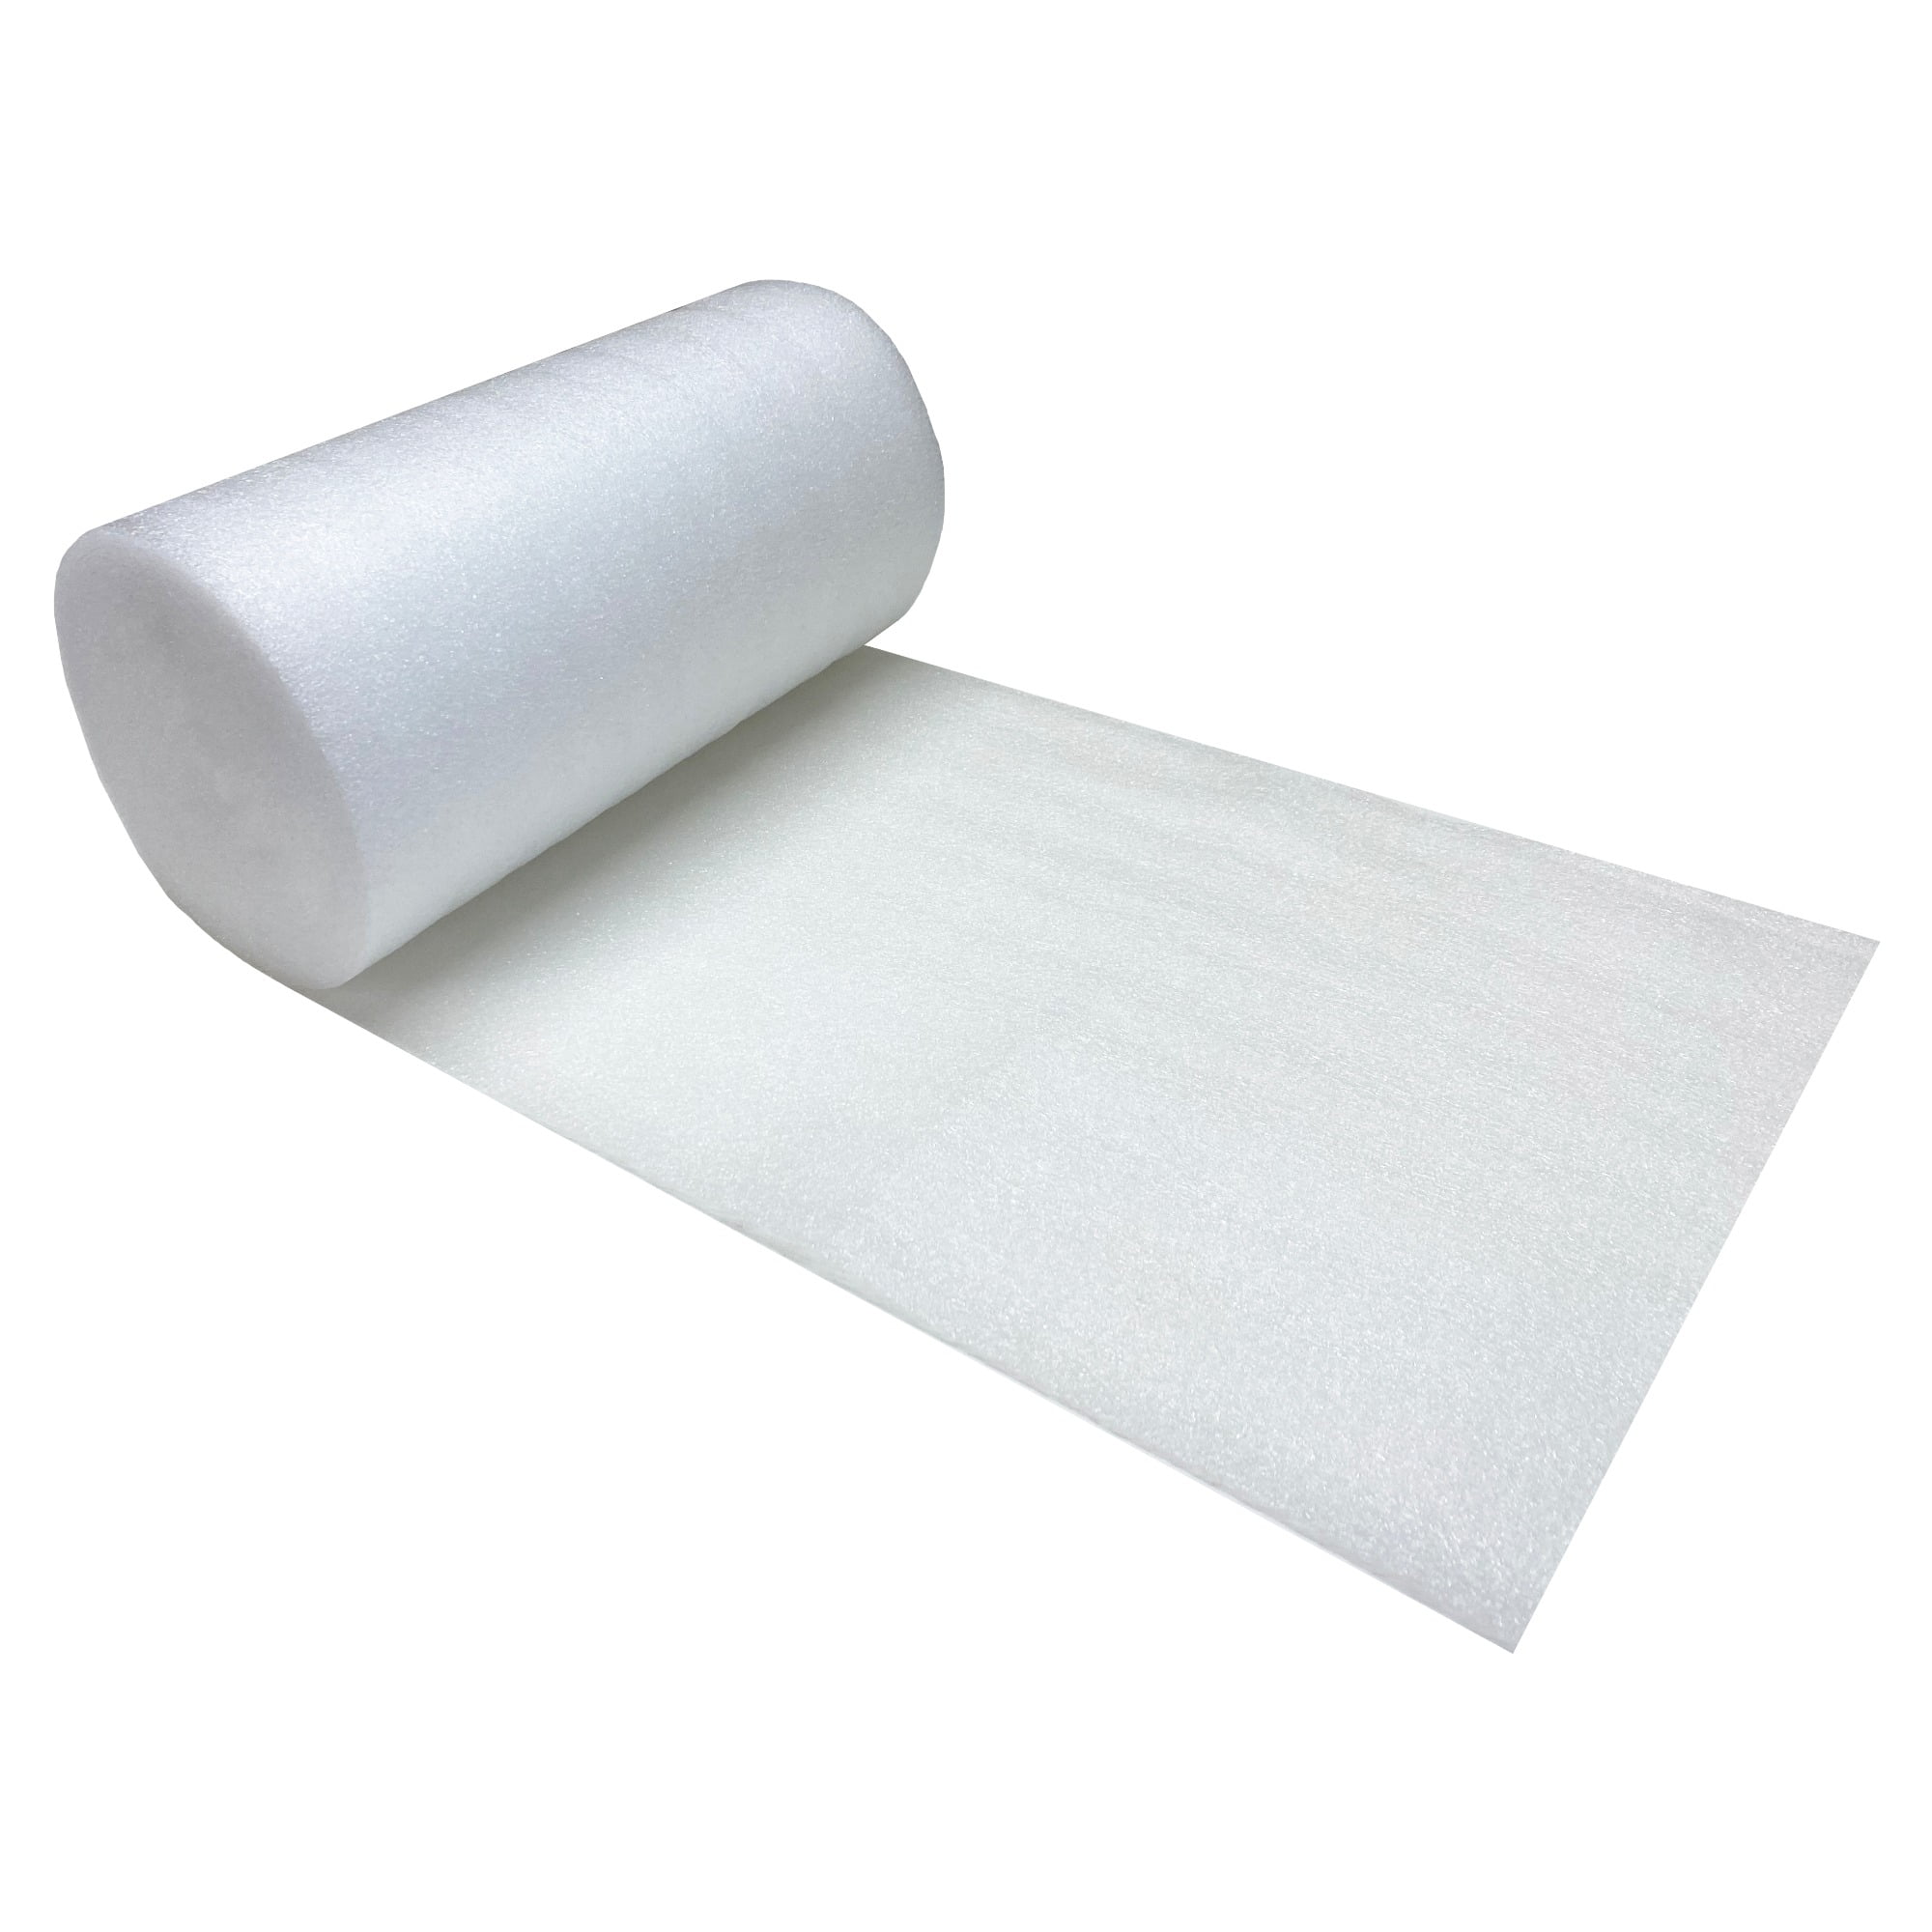  Uboxes Foam Wrap Roll 320' x 12 Wide 1/16 Thick Cushion - 12  Perforation, White, FOAM11622512 : Office Products